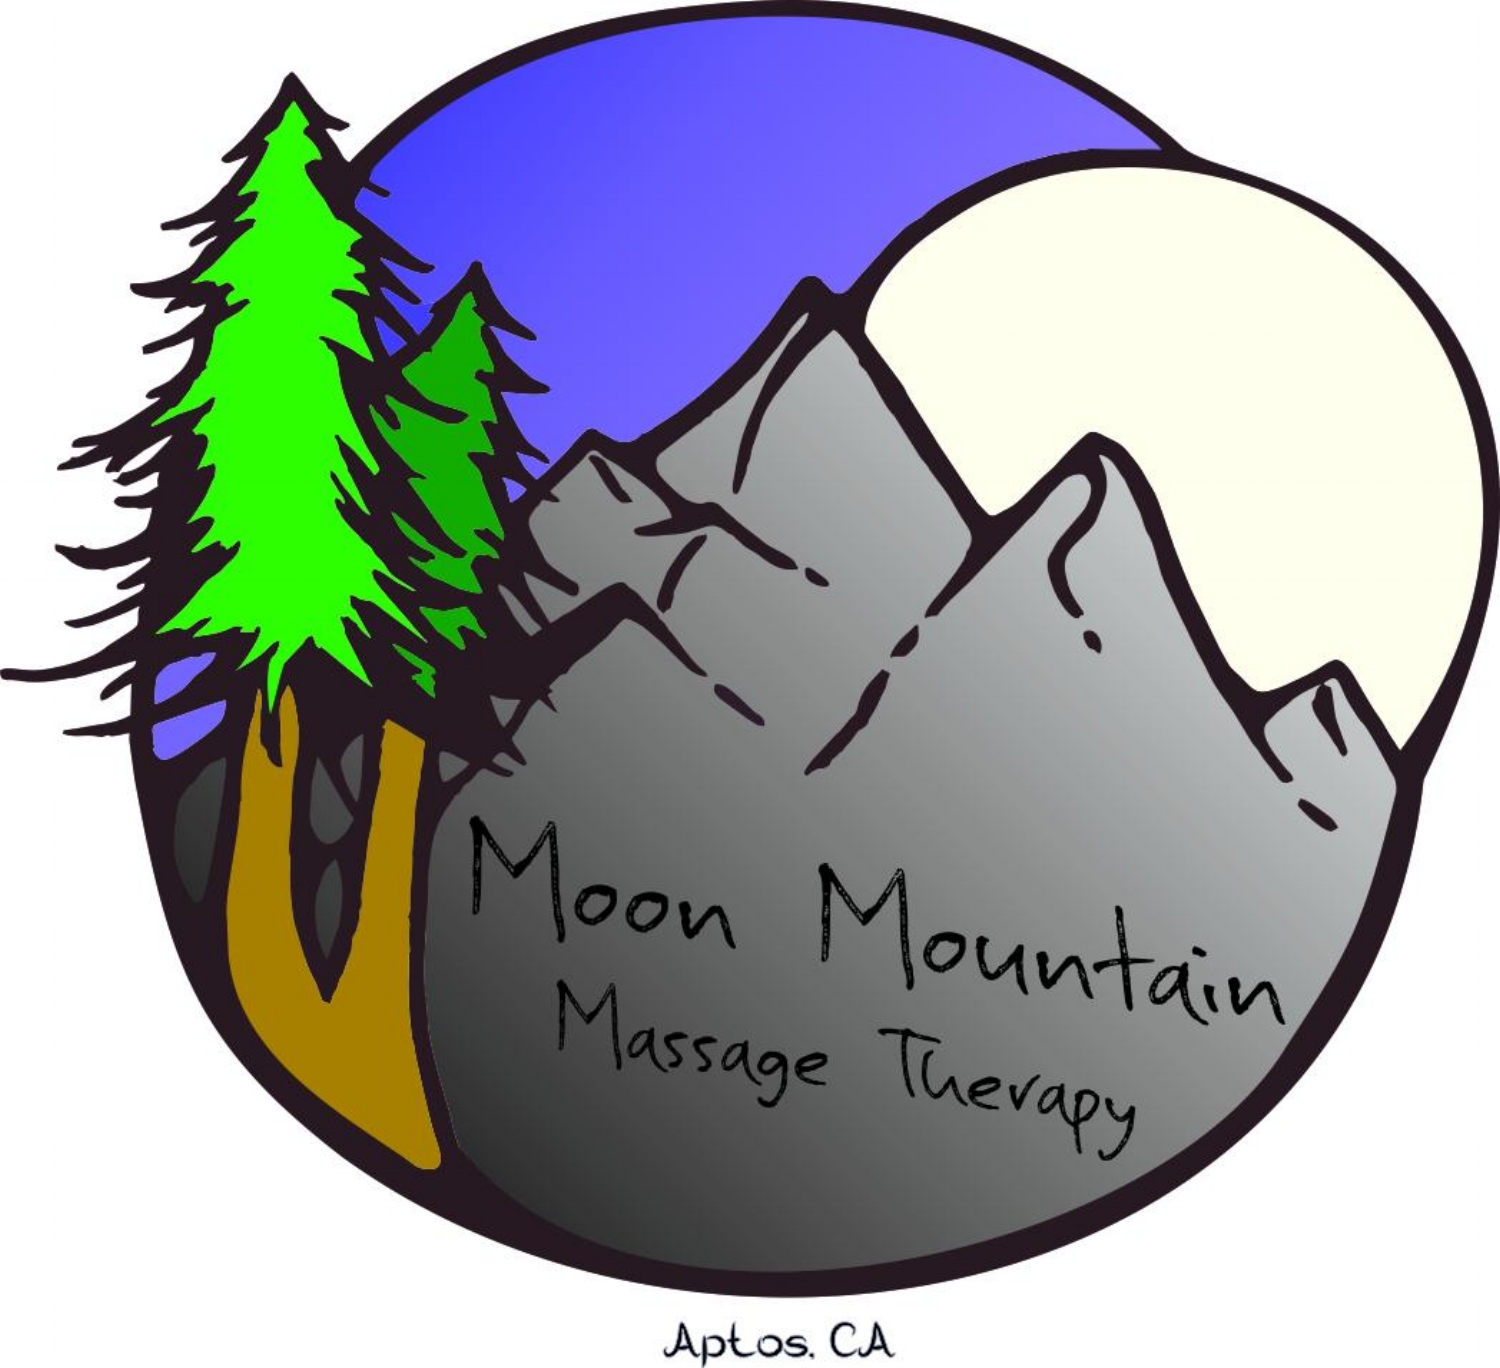 Moon Mountain Massage Therapy